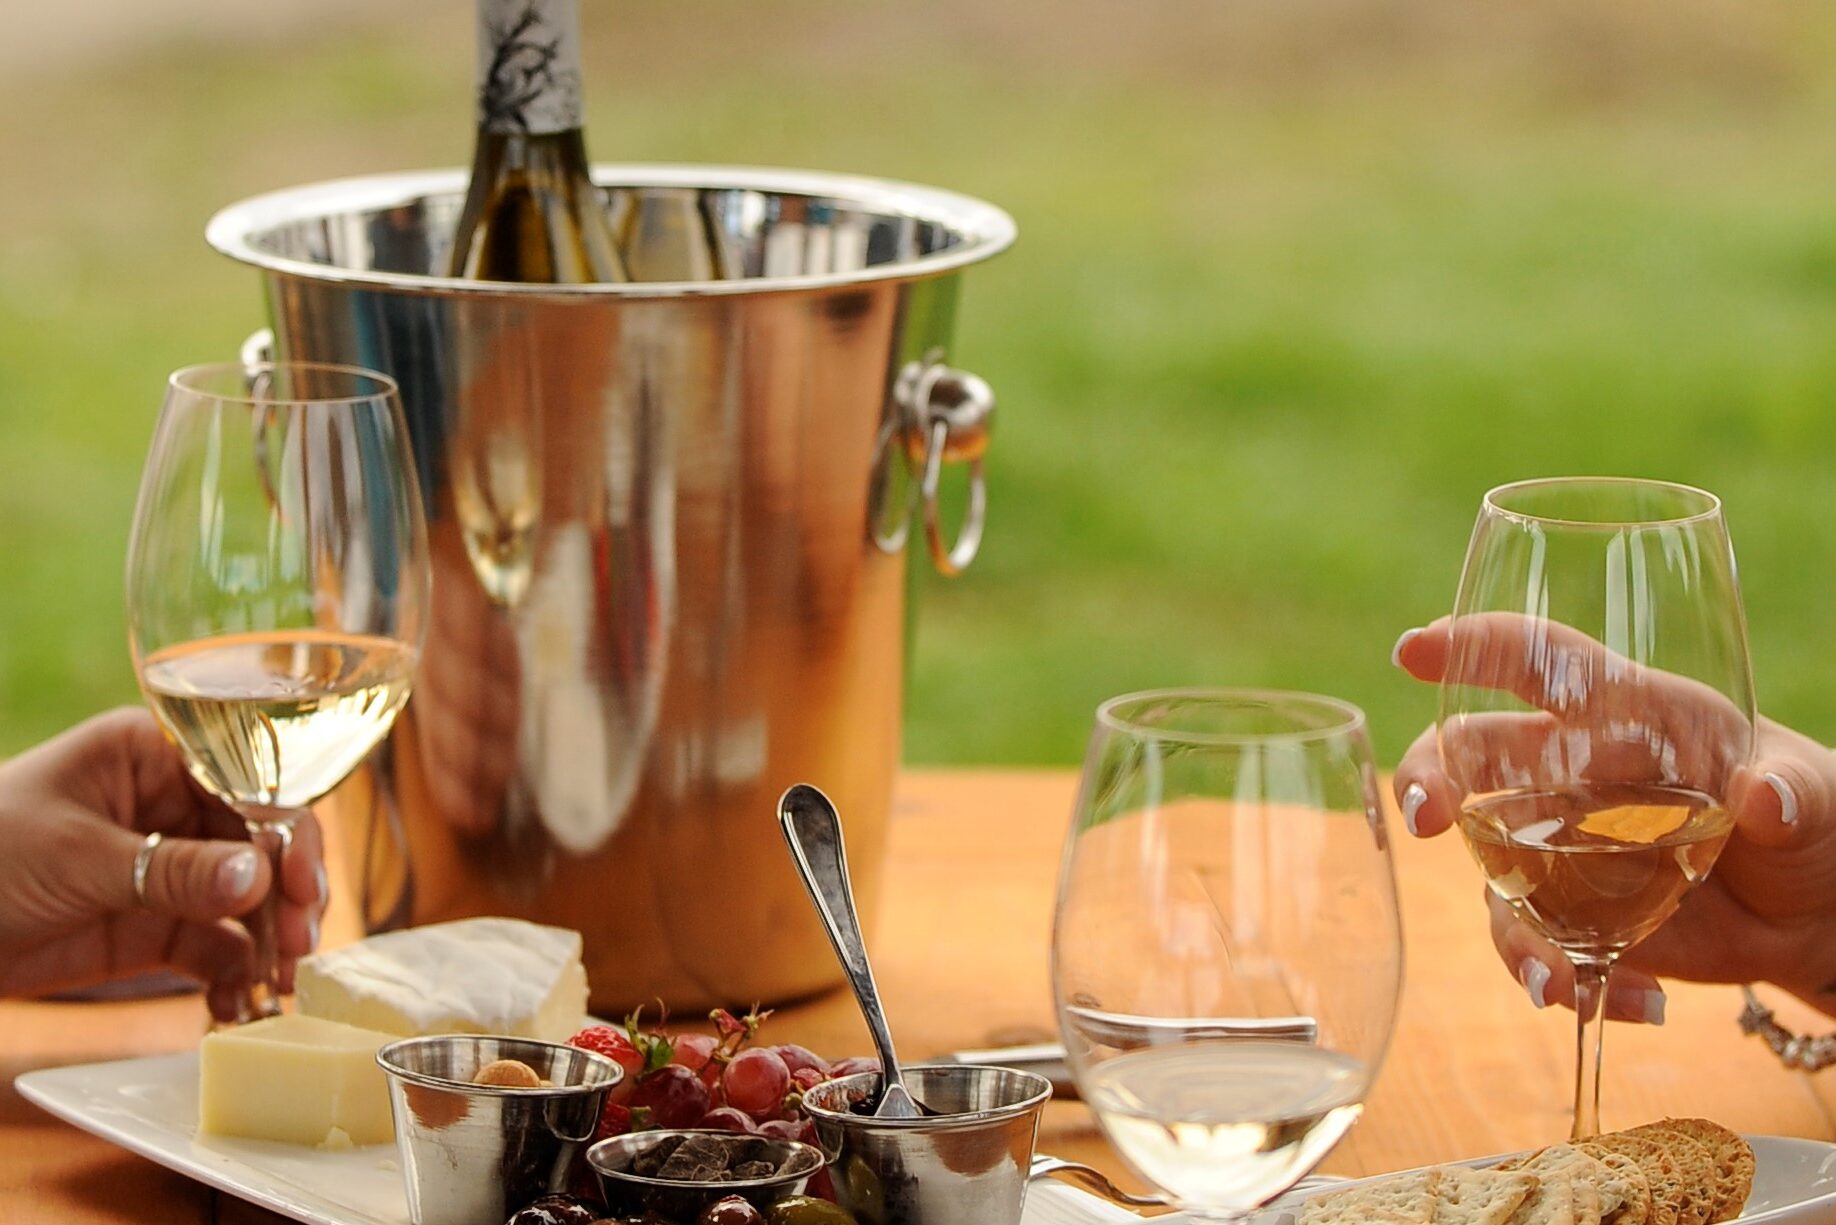 A close-up shot of a picnic table outdoors, with several wine glasses, a charcuterie board, and a wine bottle in an ice bucket.